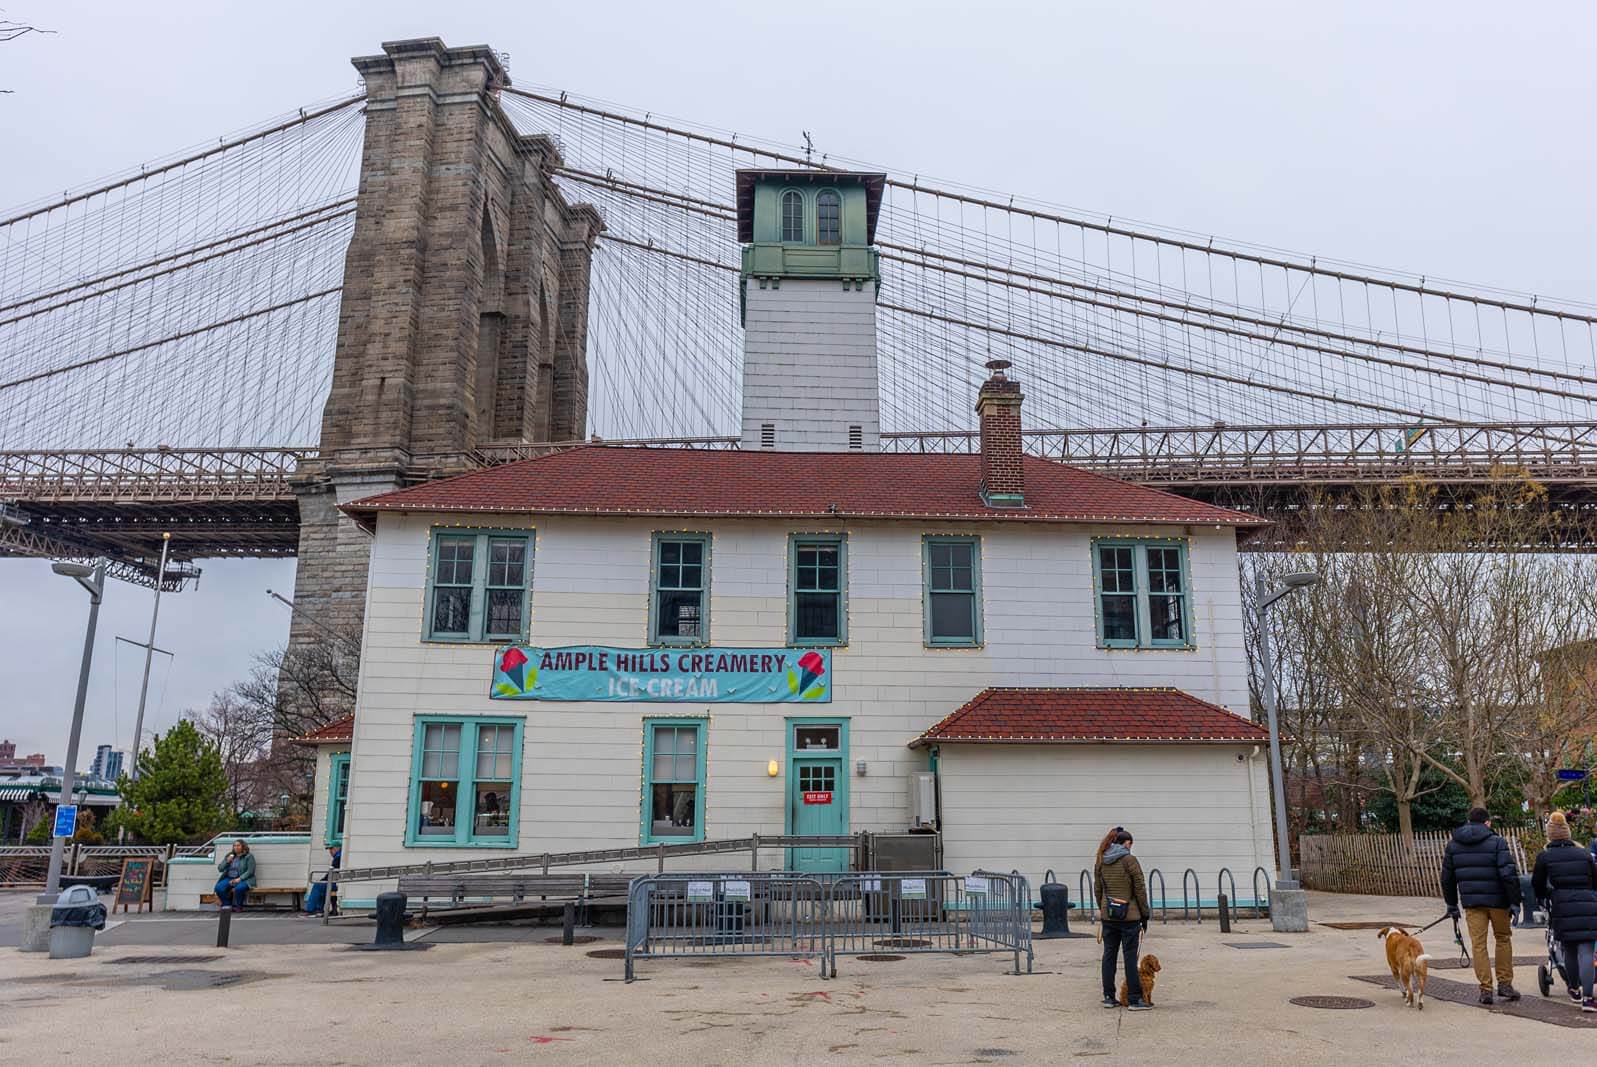 Ample Hills Creamery with Brooklyn Bridge in background located at edge of Brooklyn Heights